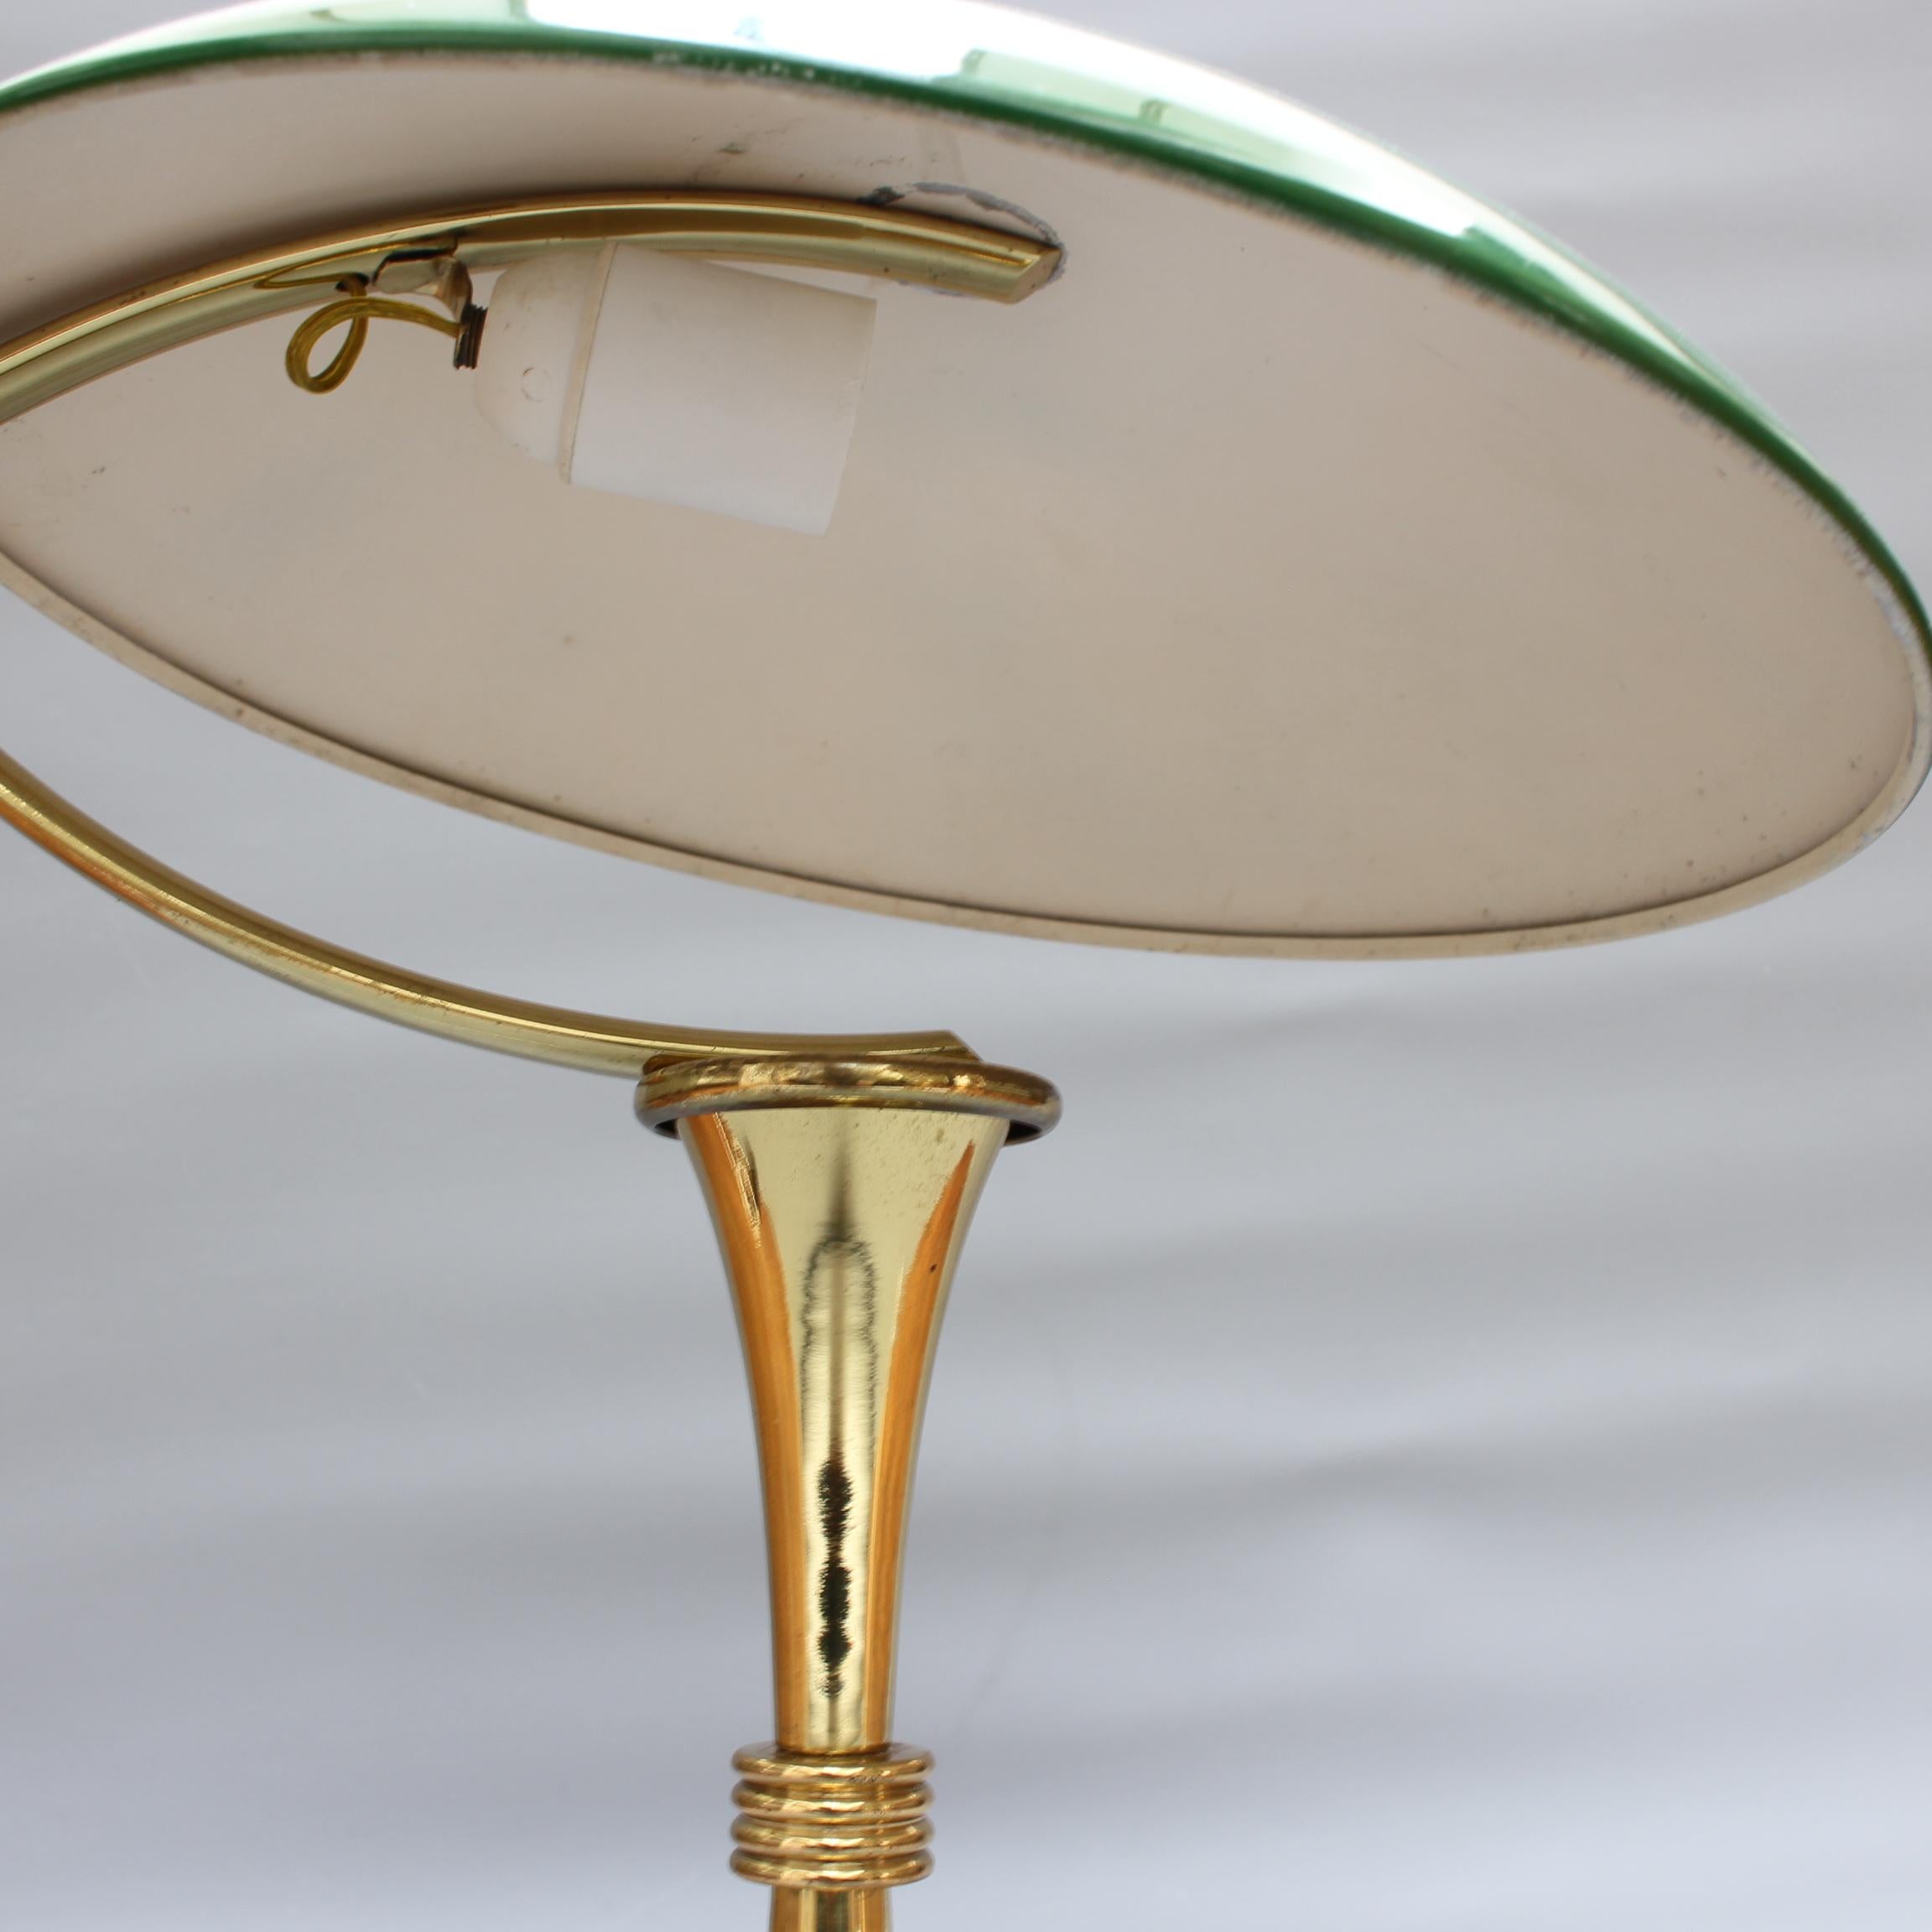 Italian Mid-Century Brass-Covered Desk Lamp with Green Shade 'circa 1950s' For Sale 8